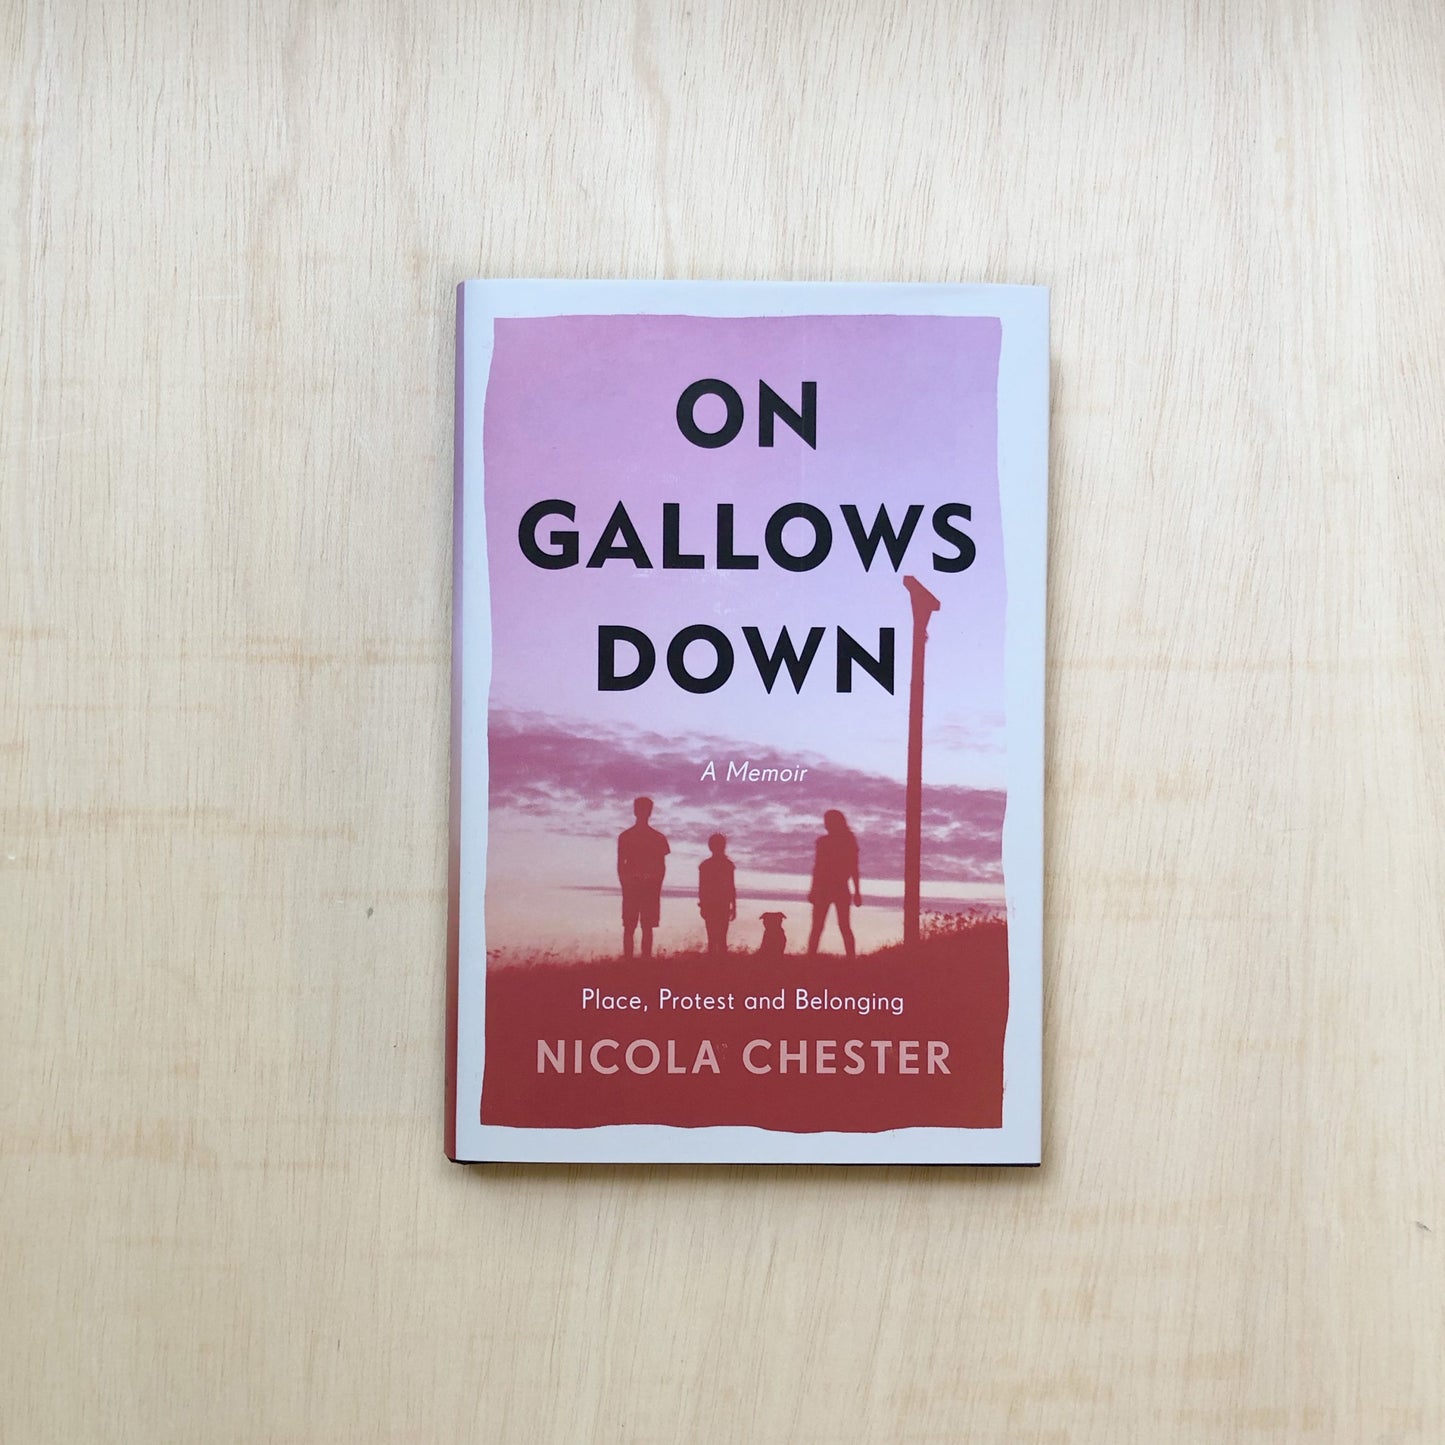 On Gallows Down - Place, Protest and Belonging